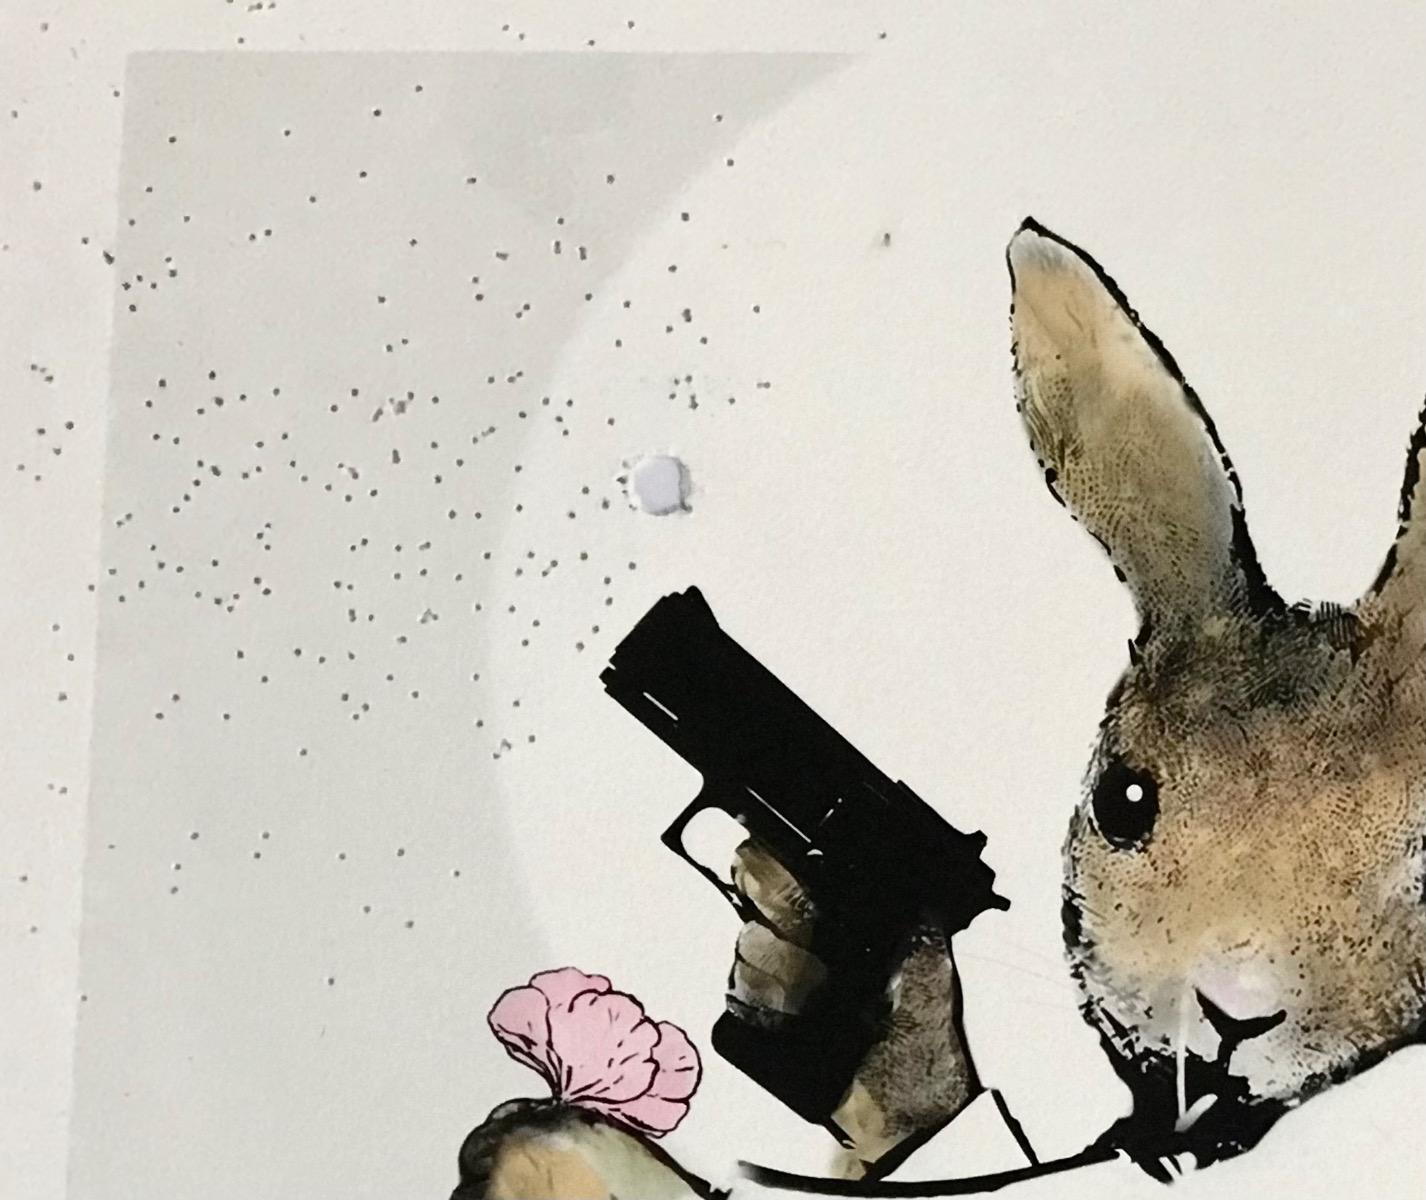 Rural Resistance Series - Home Guard, Animal print, Bunny, Abstract print - Gray Abstract Print by Harry Bunce